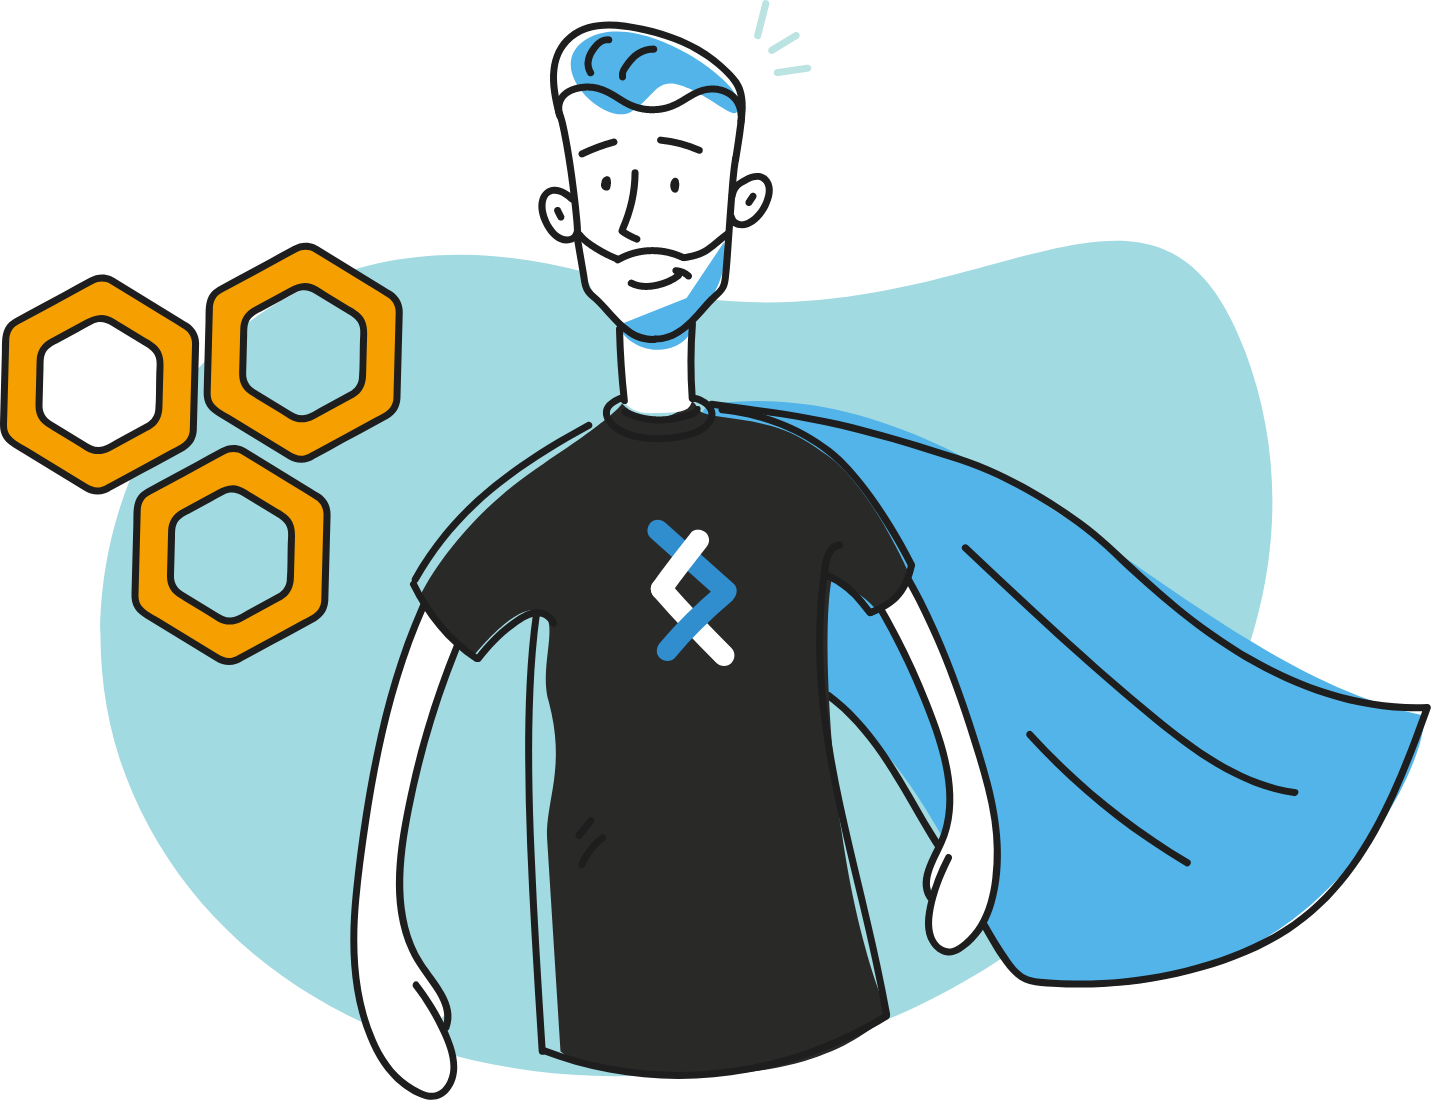 Illustration of DNX character wearing a cape, next to three gold hexagons